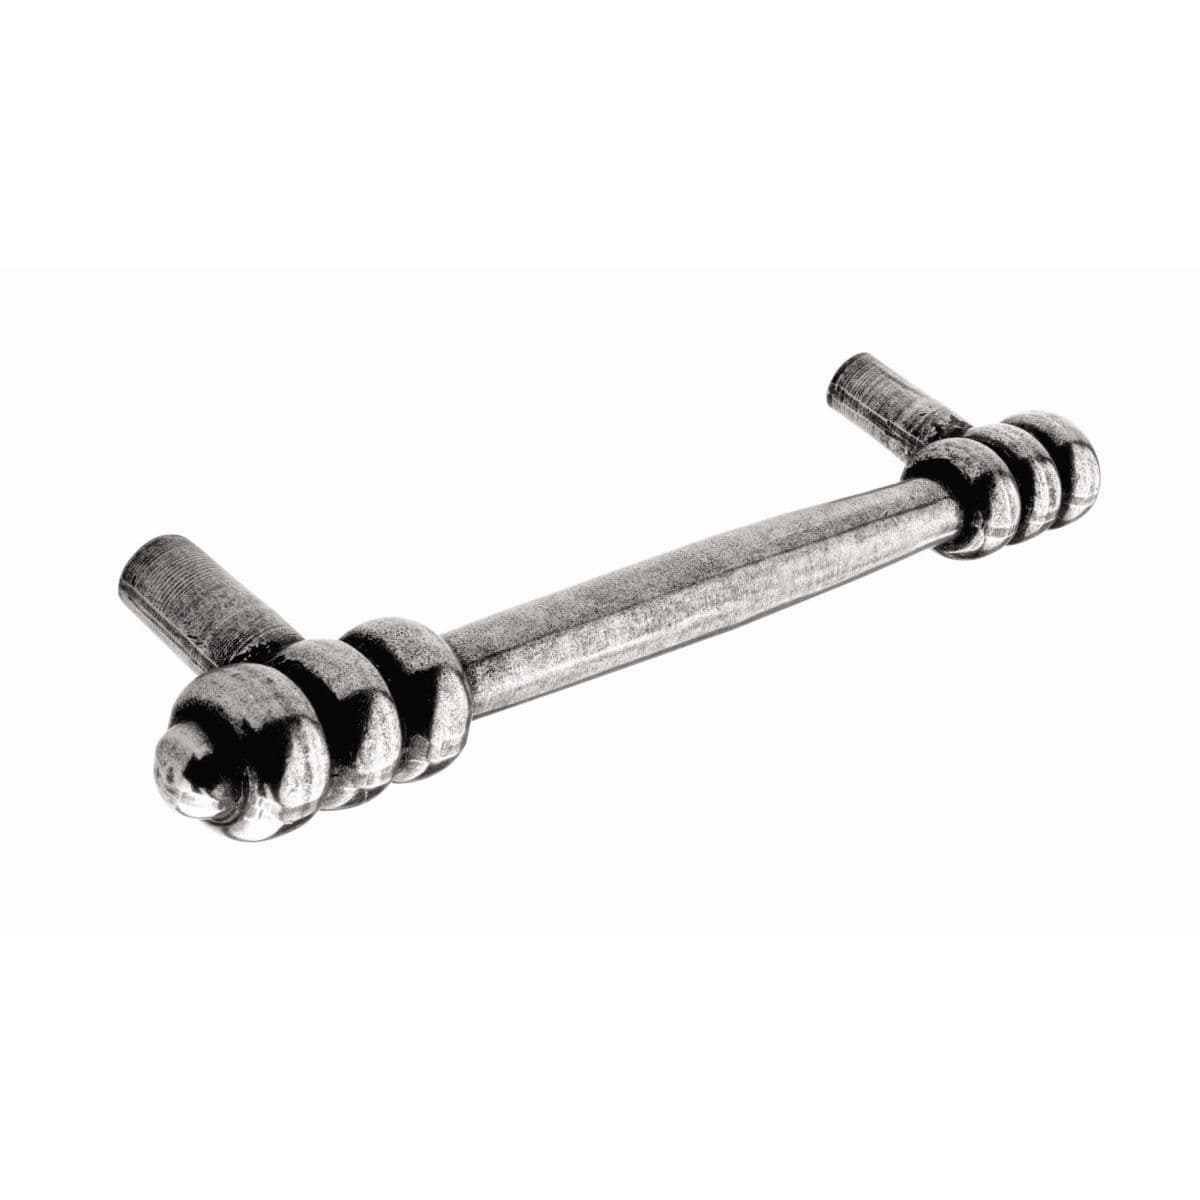 GROVE T BAR Cupboard Handle - 128mm h/c size - RAW PEWTER finish (PWS H552.128.PE)